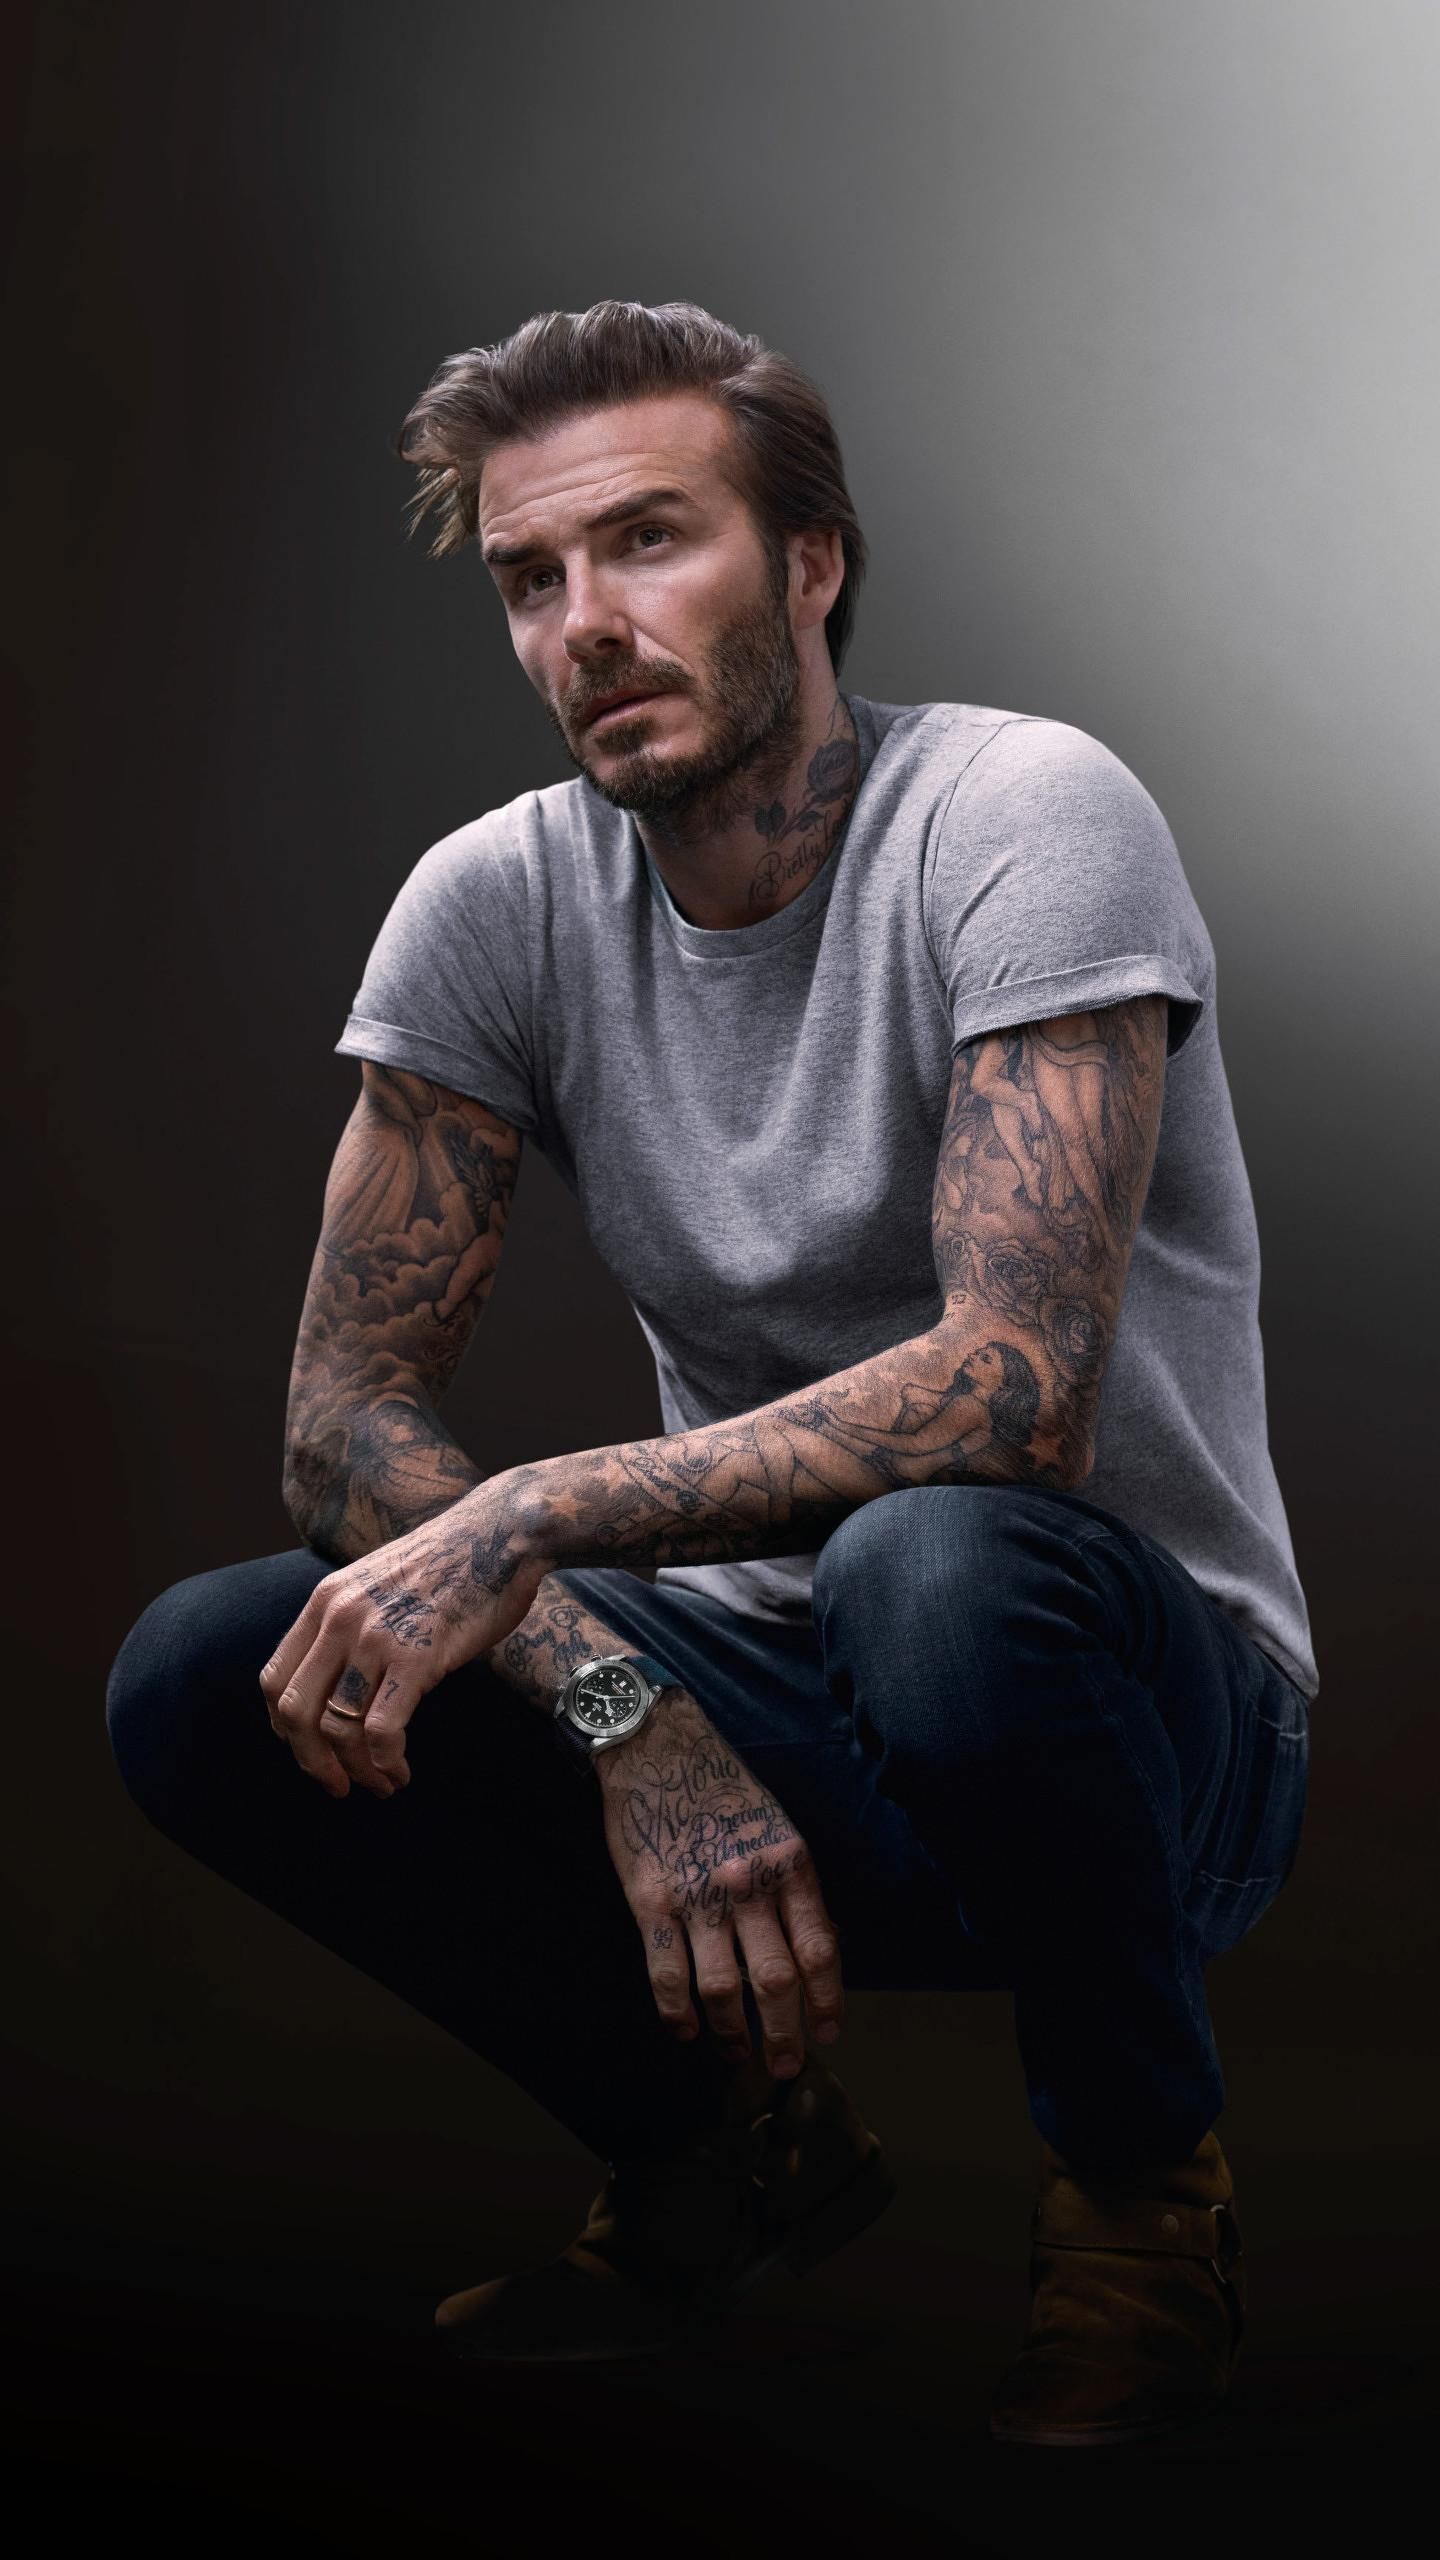 David Beckham 4k HD Sports Wallpaper Photos And Pictures